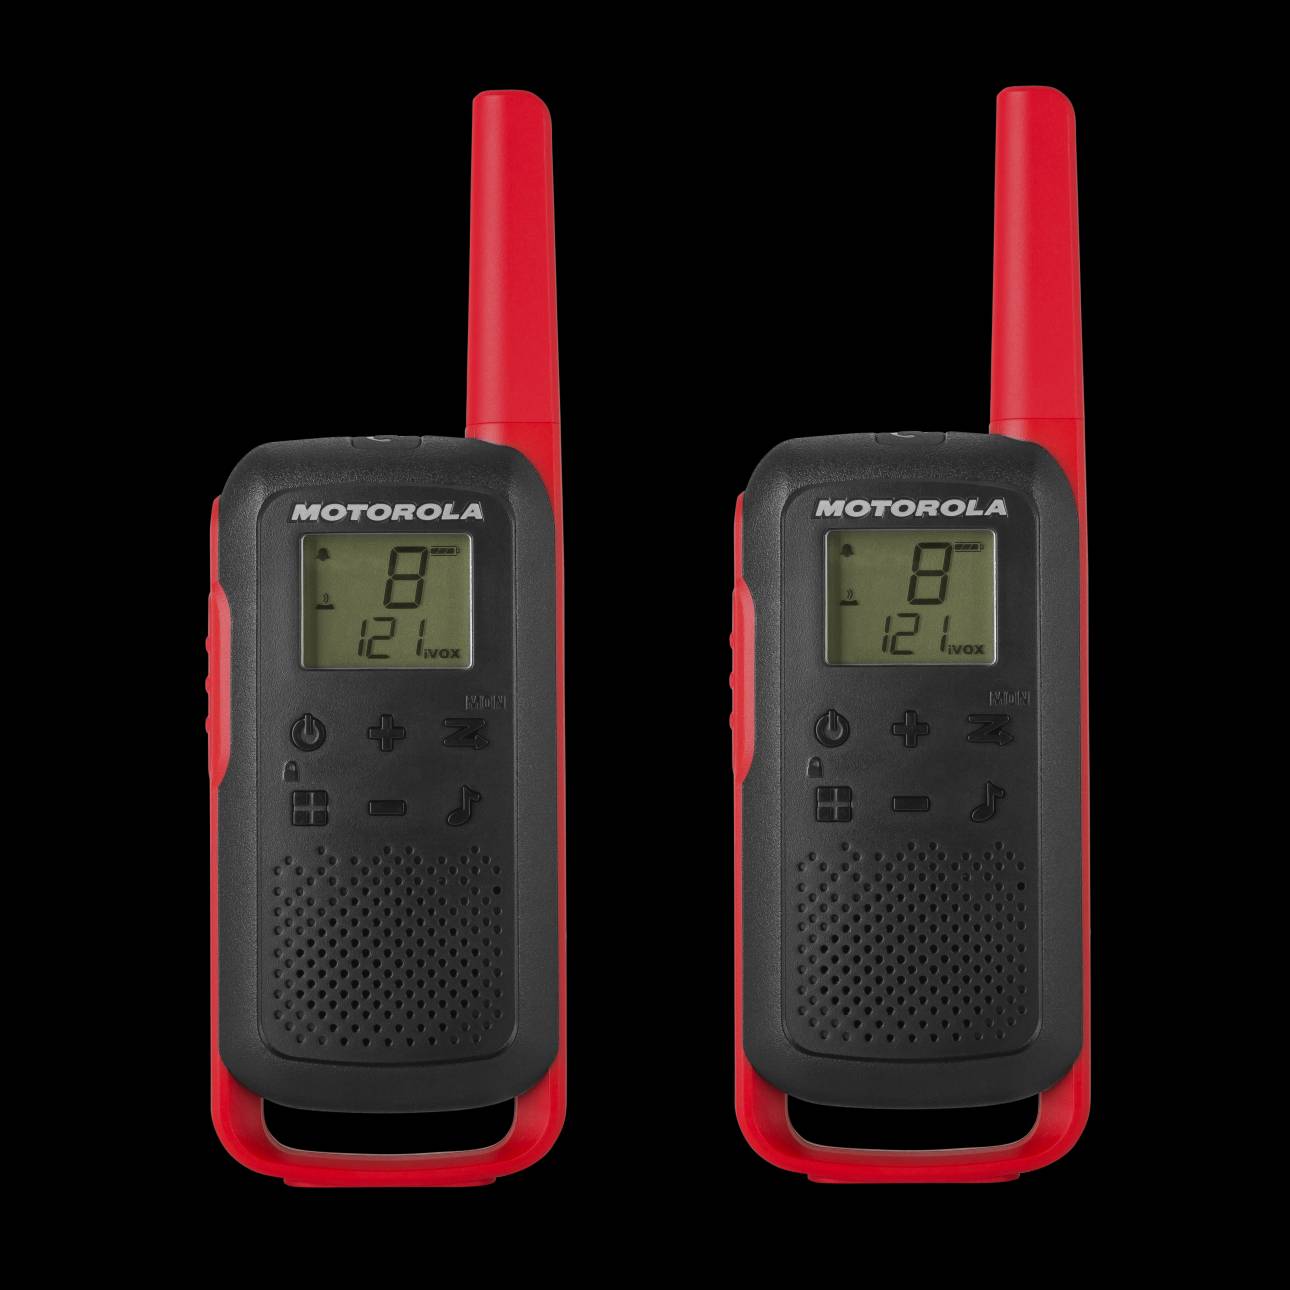 Motorola Solutions Talkabout® T465 Two-Way Radios, Green/Black - 2 Pack